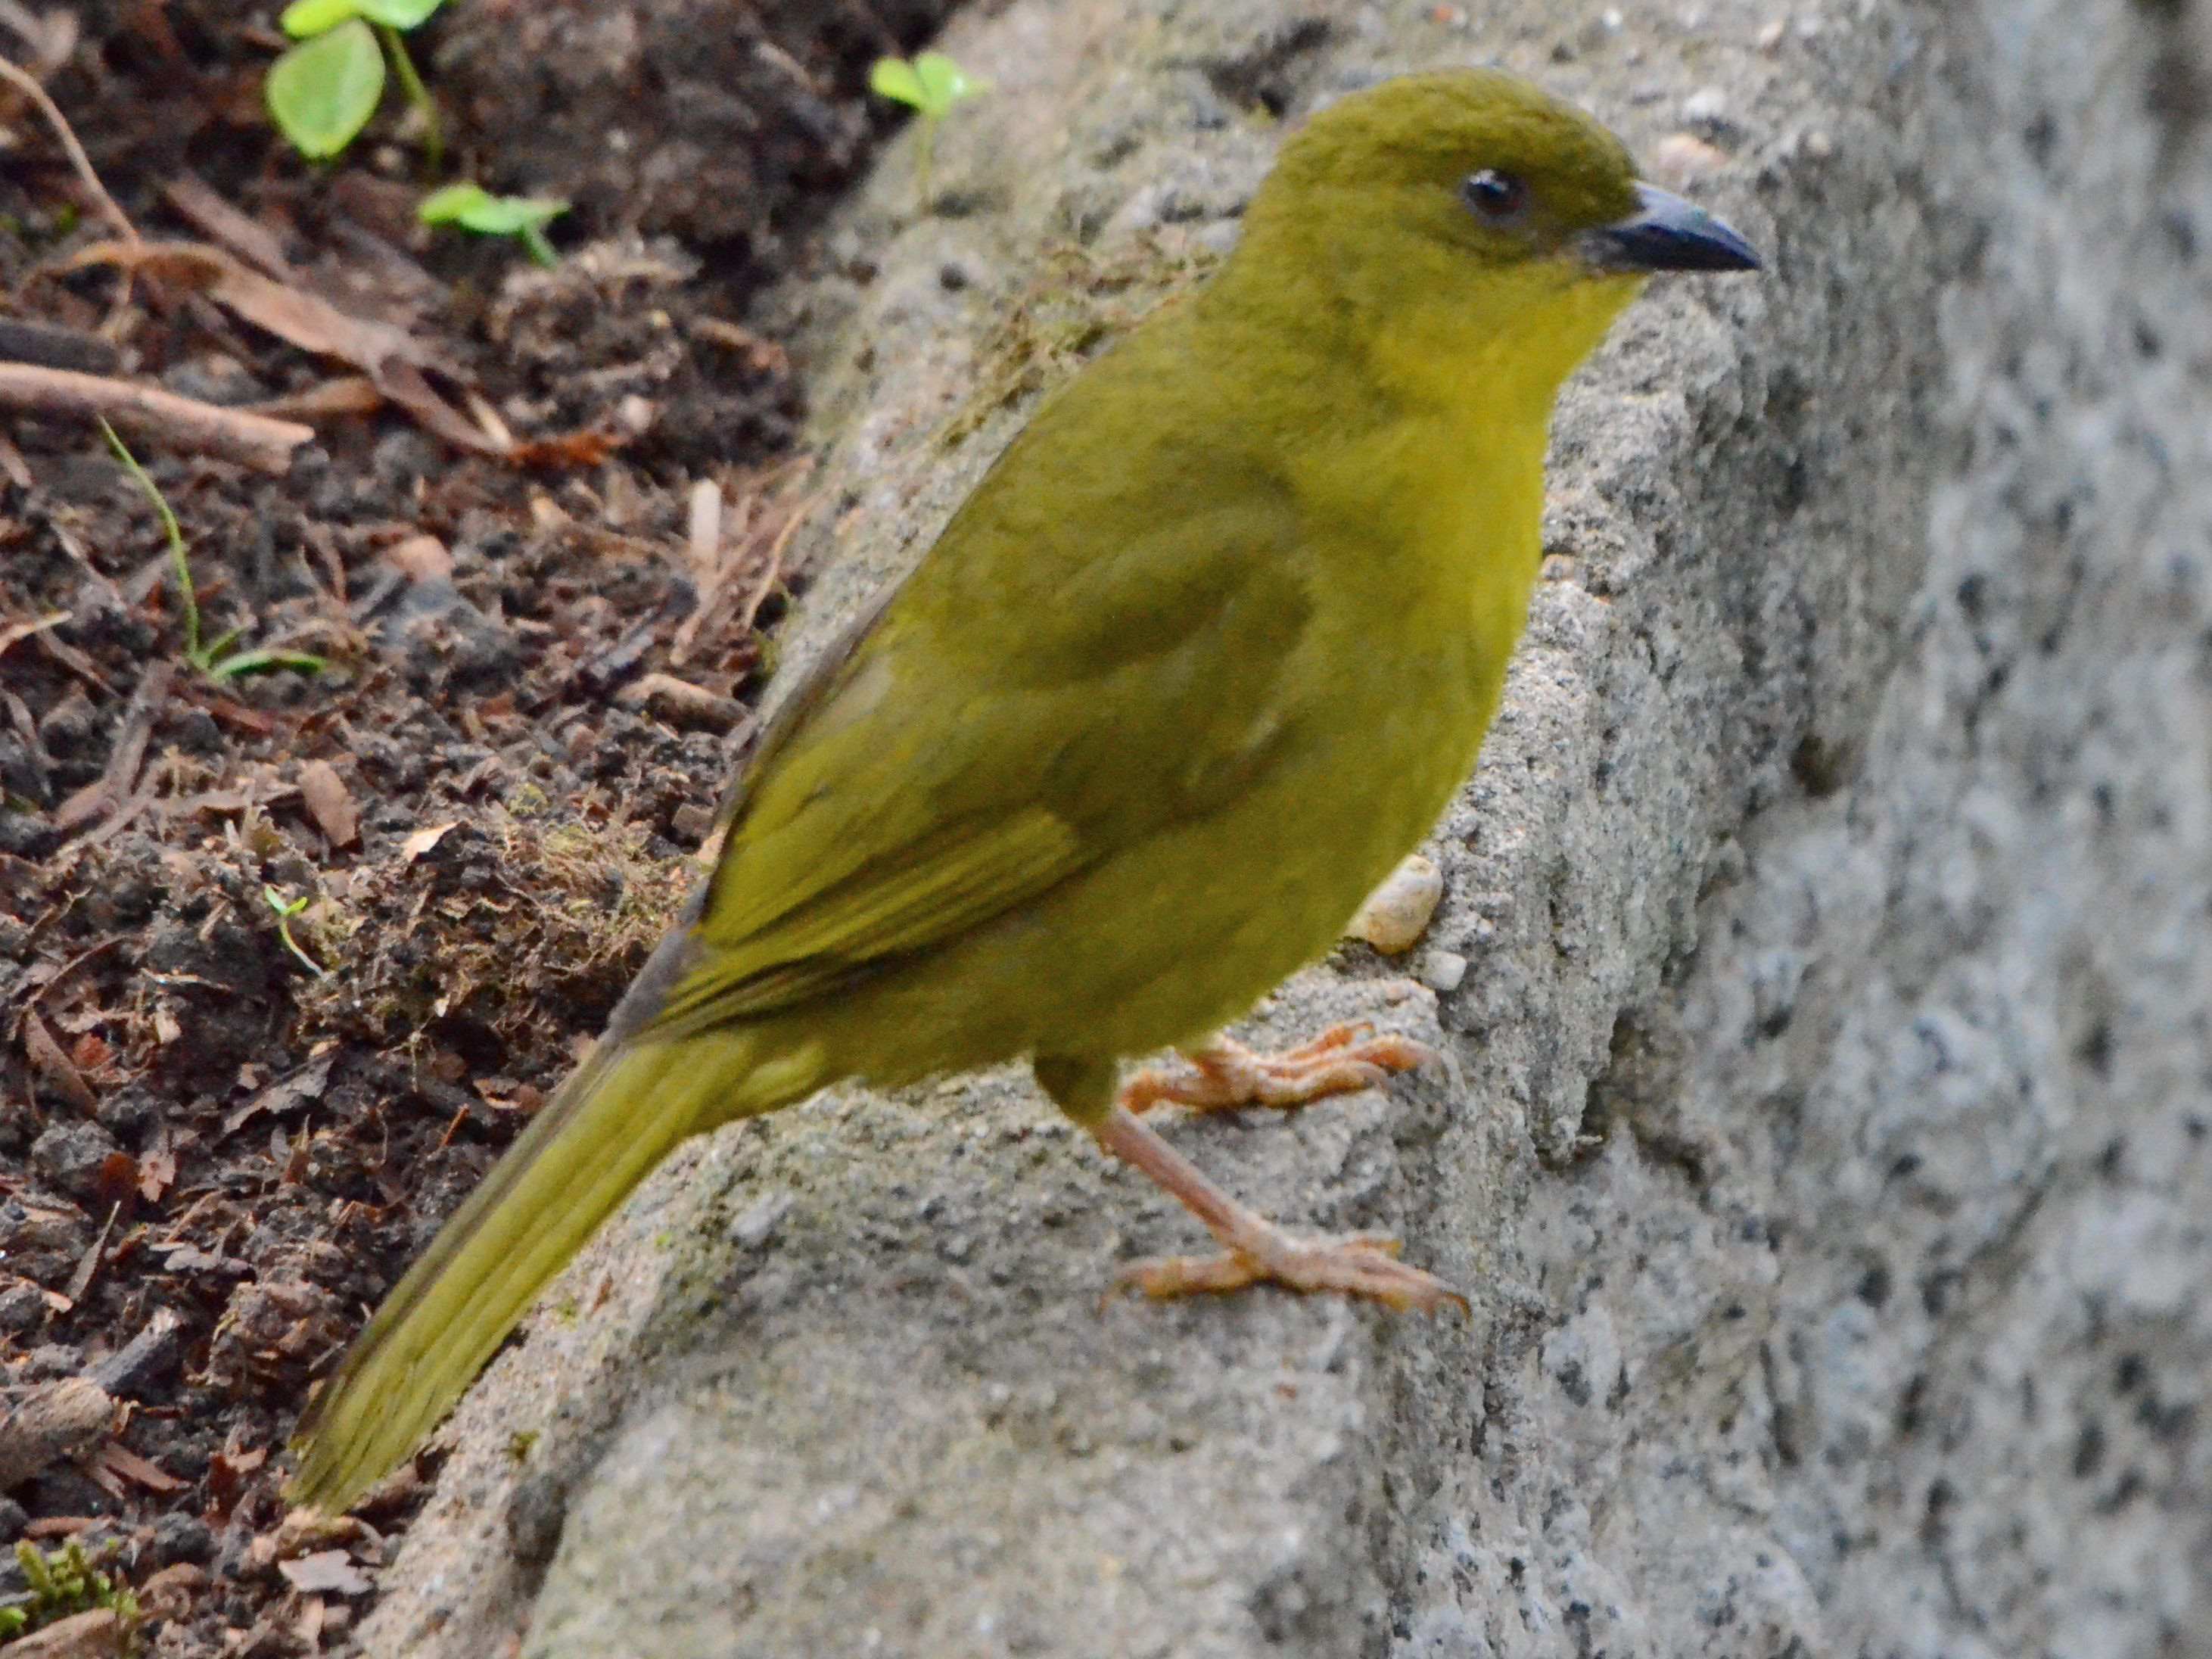 Click picture to see more Olive-green Tanagers.